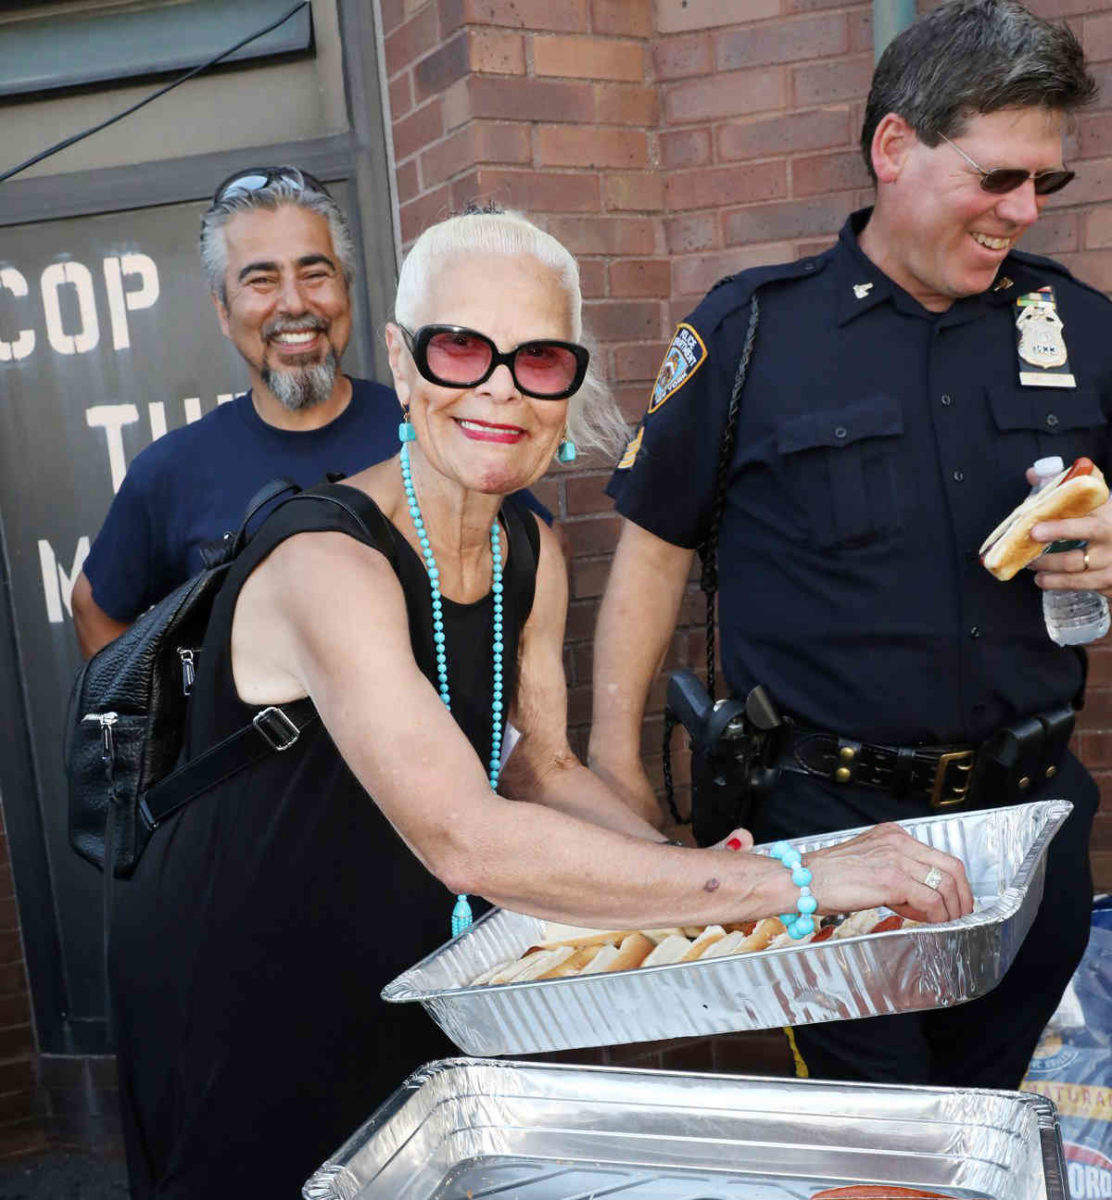 Fun police: Brooklynites join forces with officers at the 61st Precinct for annual Night Out carnival